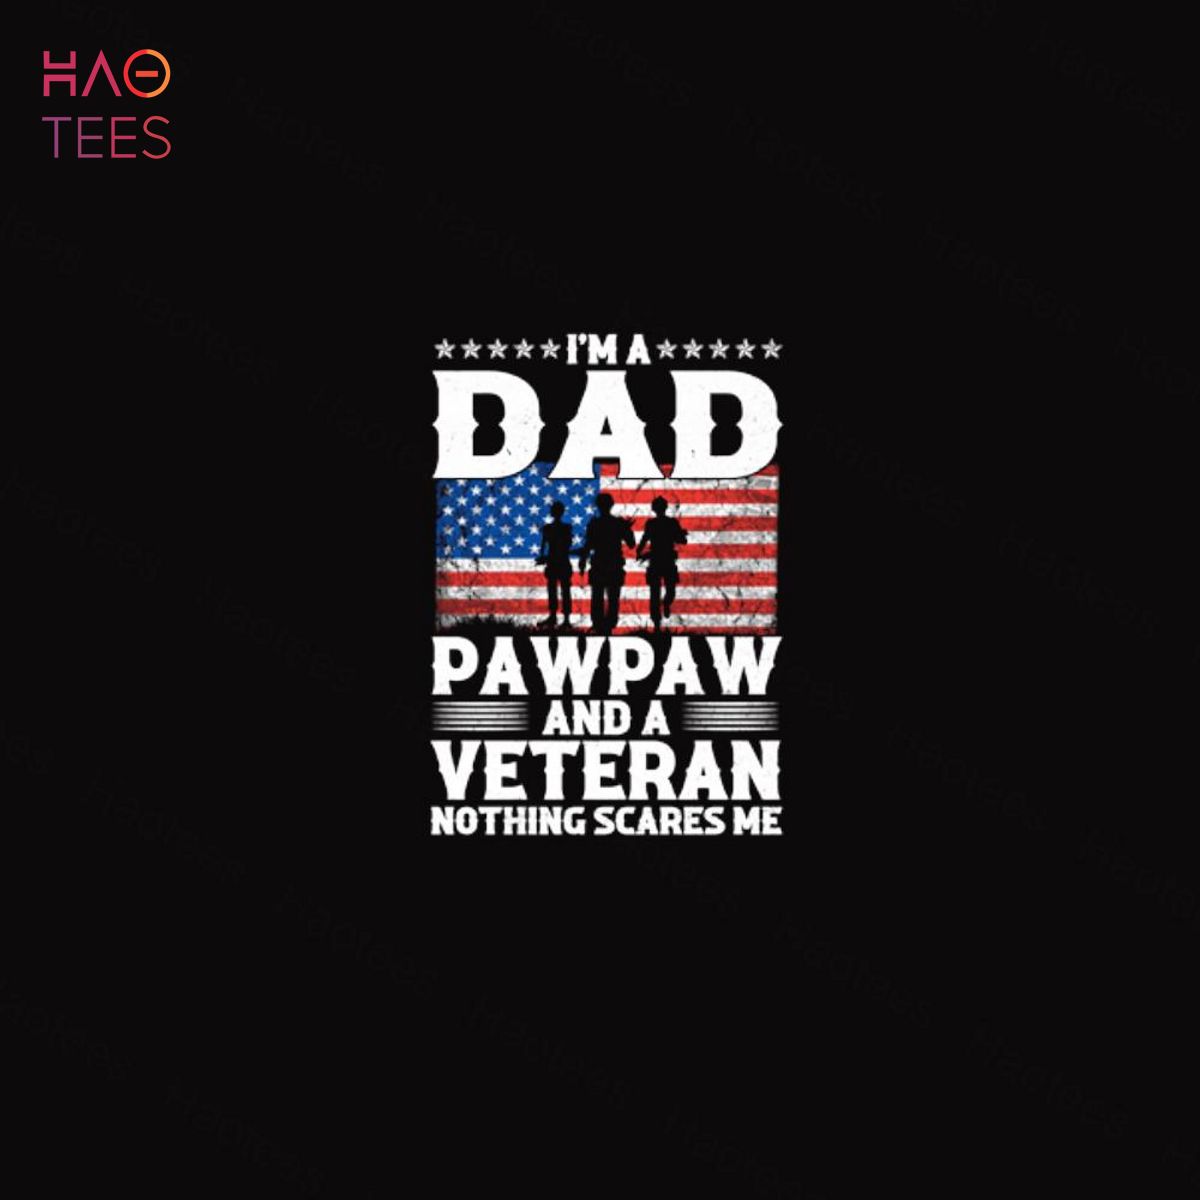 I Am A Dad A Pawpaw And A Veteran T Shirt Fathers Day Shirt